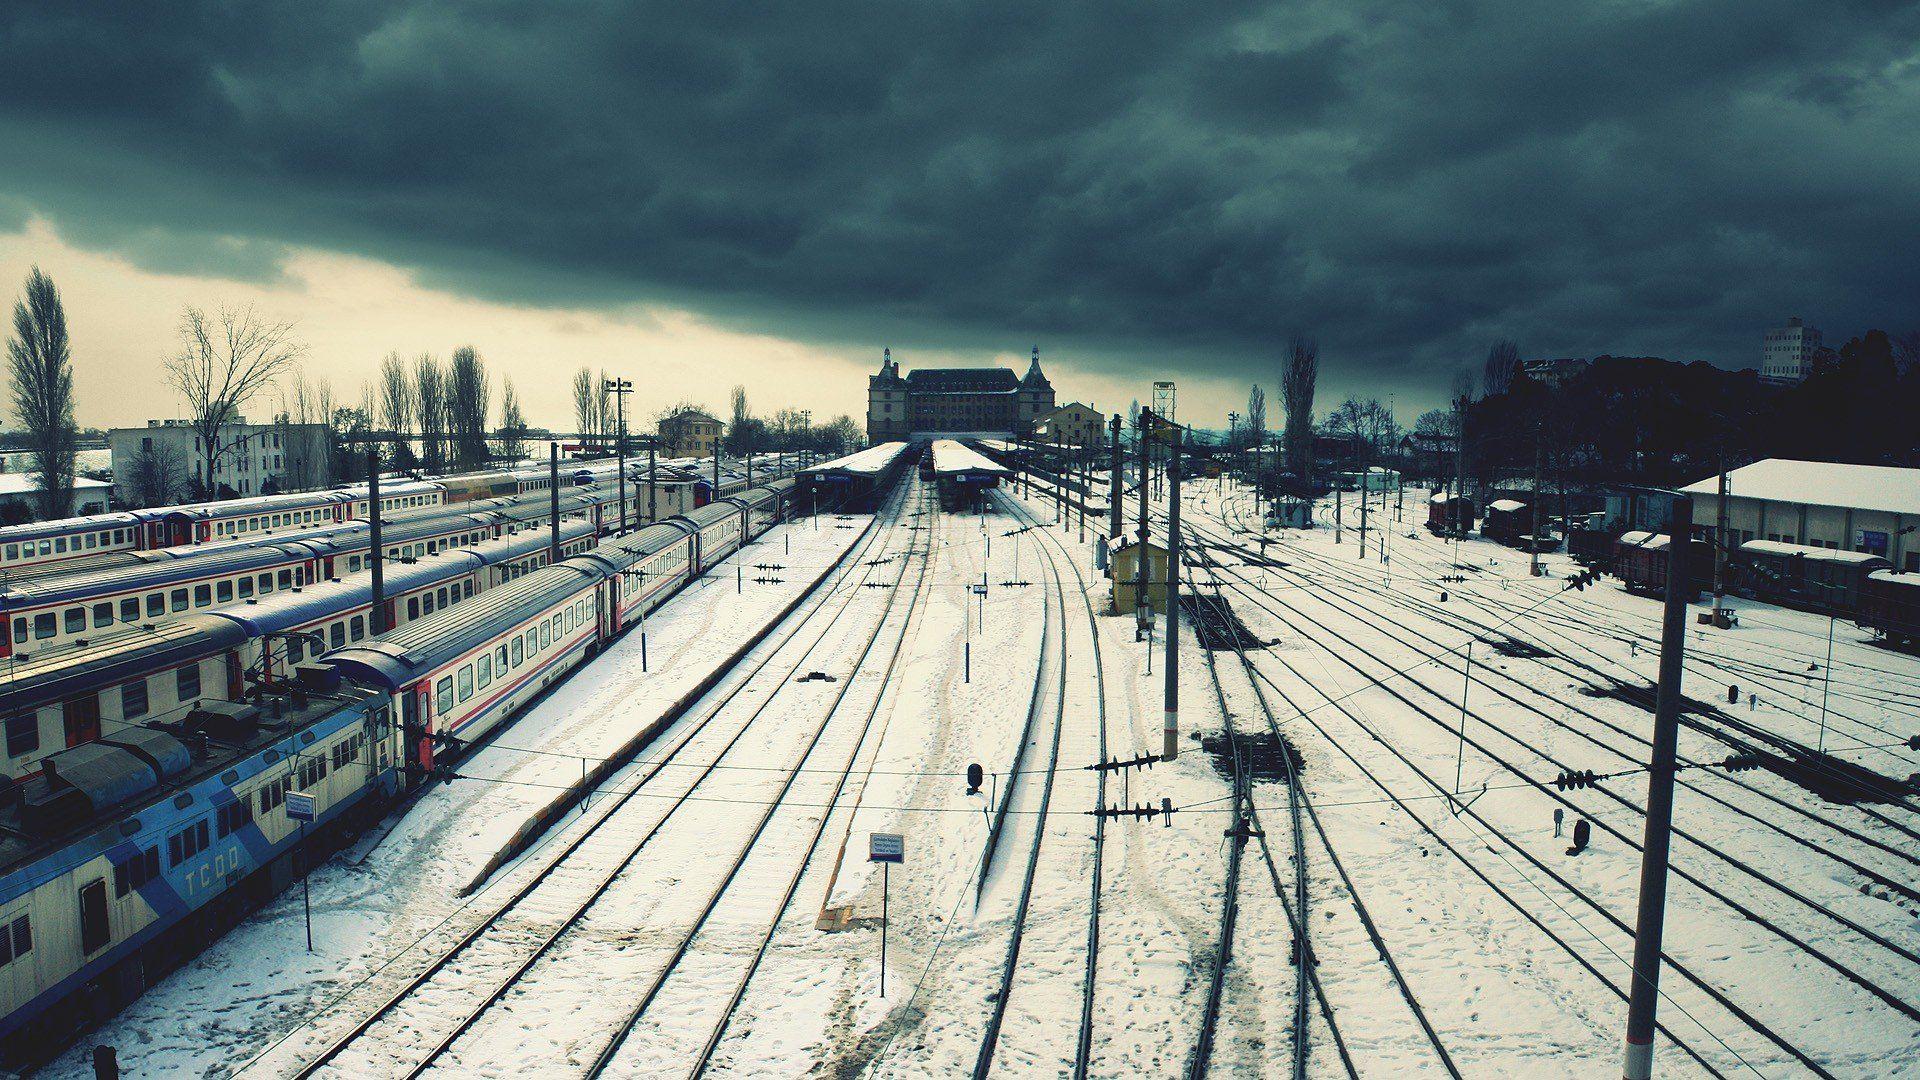 city train station railway snow istanbul wallpaper and background